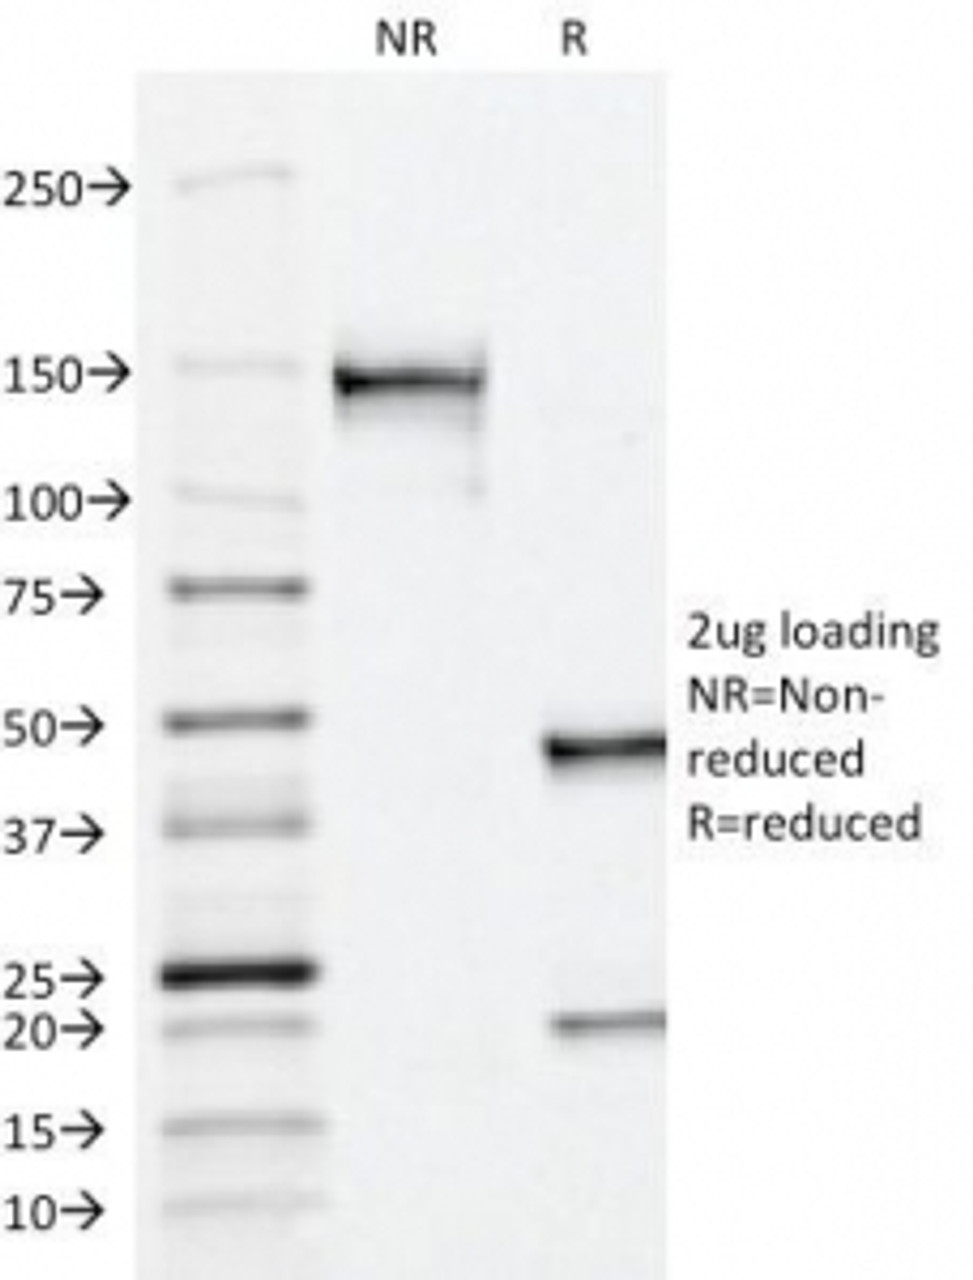 SDS-PAGE Analysis of Purified, BSA-Free PSAP Antibody (ACCP/1338) . Confirmation of Integrity and Purity of the Antibody.